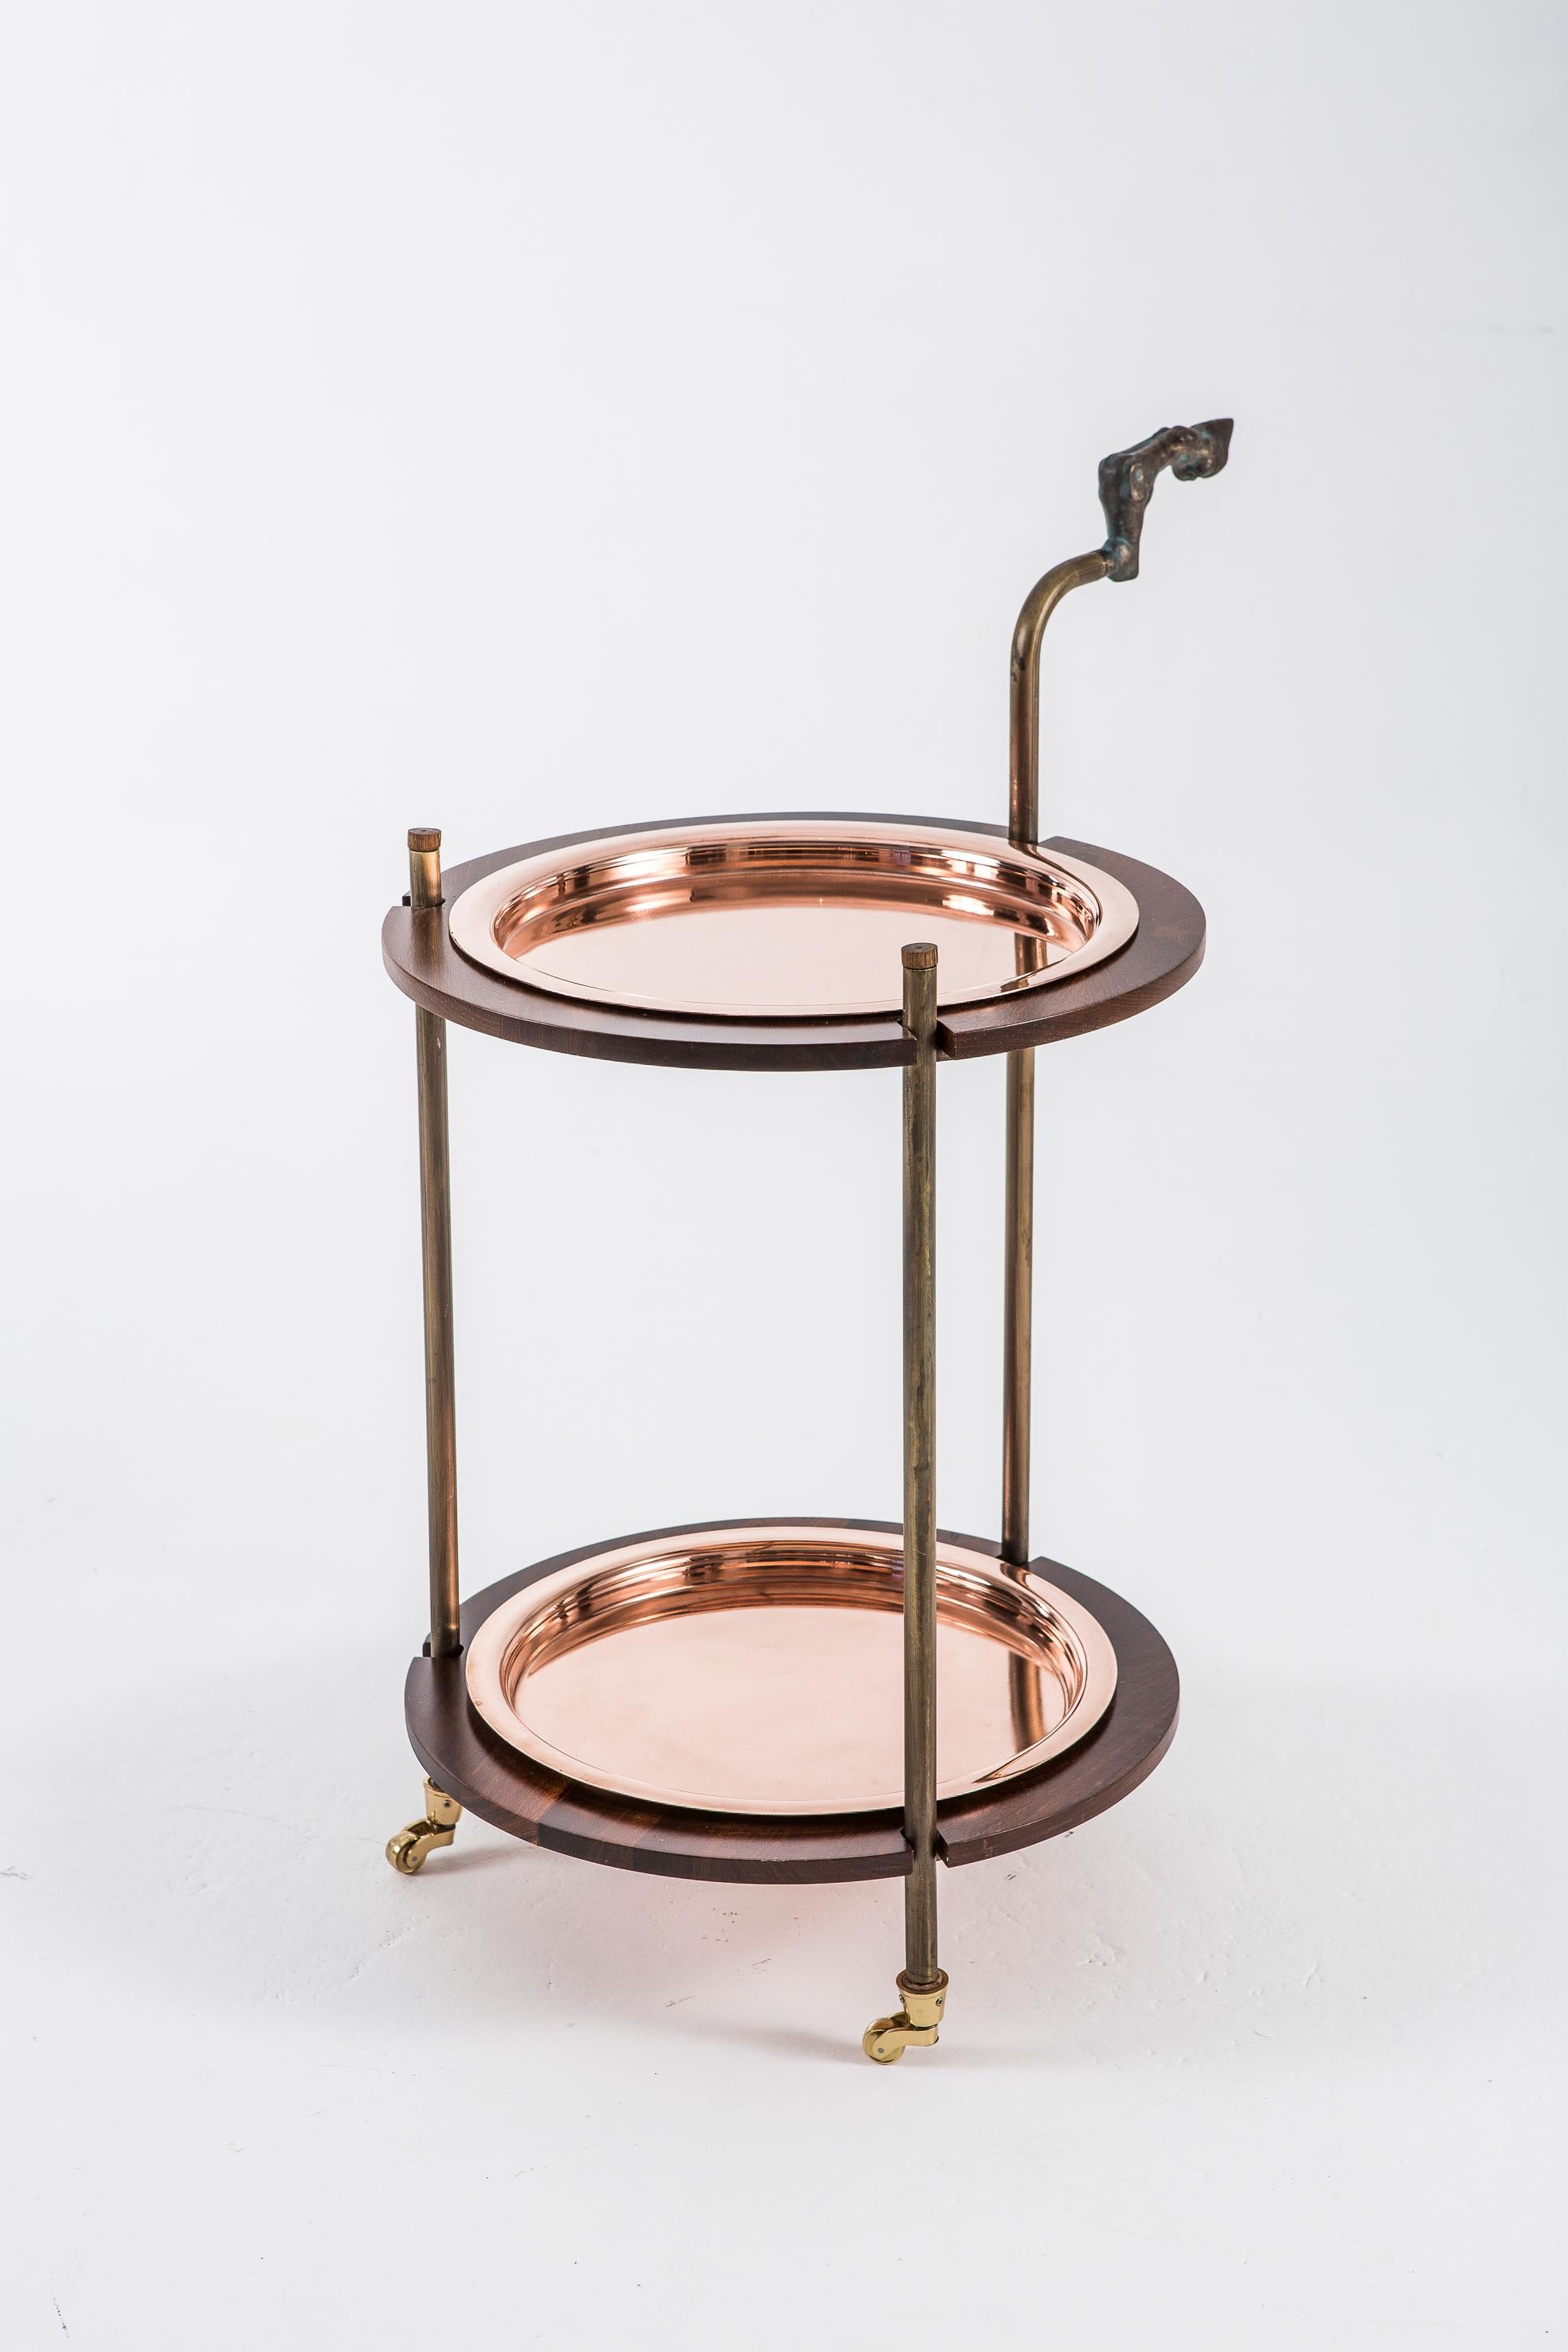 Gazelle drinks trolley by Egg Designs
Dimensions: 55 L X 74 W X 100 H cm
Materials: Solid Walnut, Copper, Composite Casting

Founded by South Africans and life partners, Greg and Roche Dry - Egg is a unique perspective in contemporary furniture